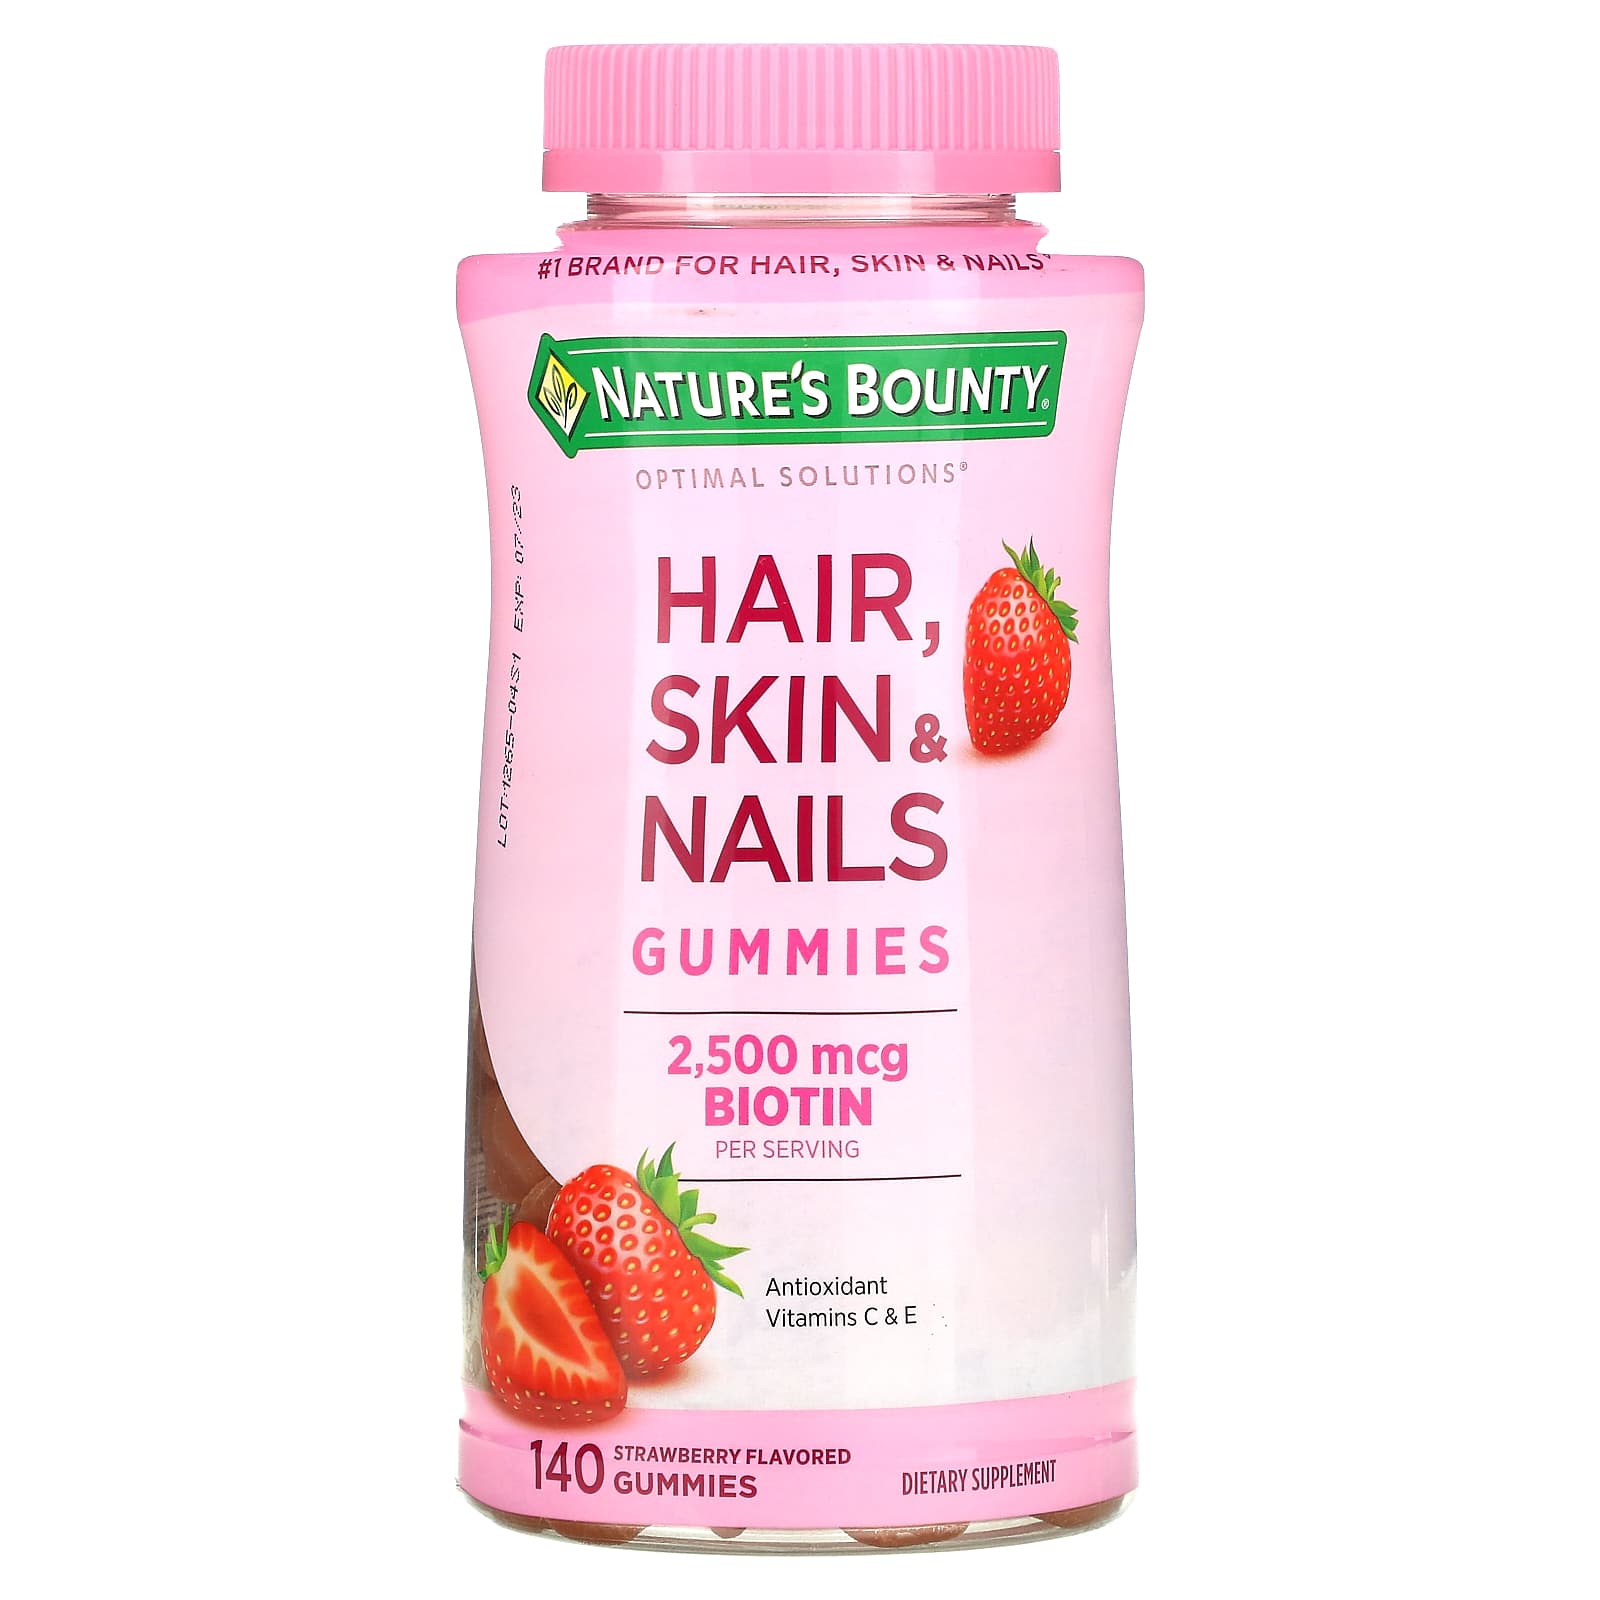 Nature's bounty hair skin and nails gummies price